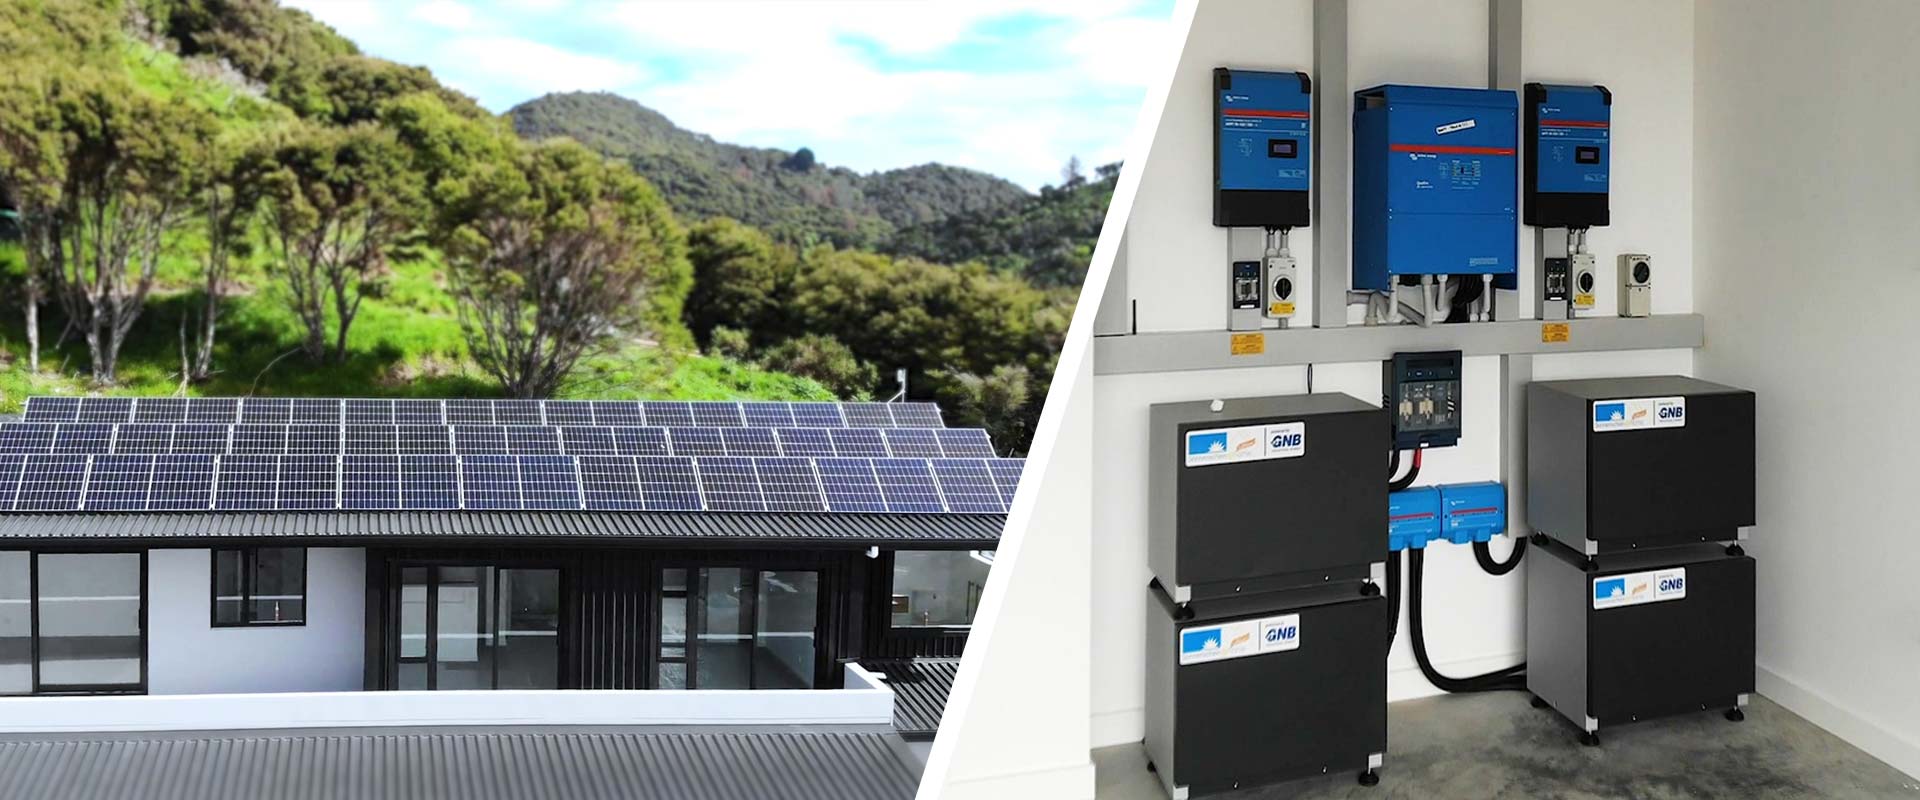 Solar power for your off-grid home